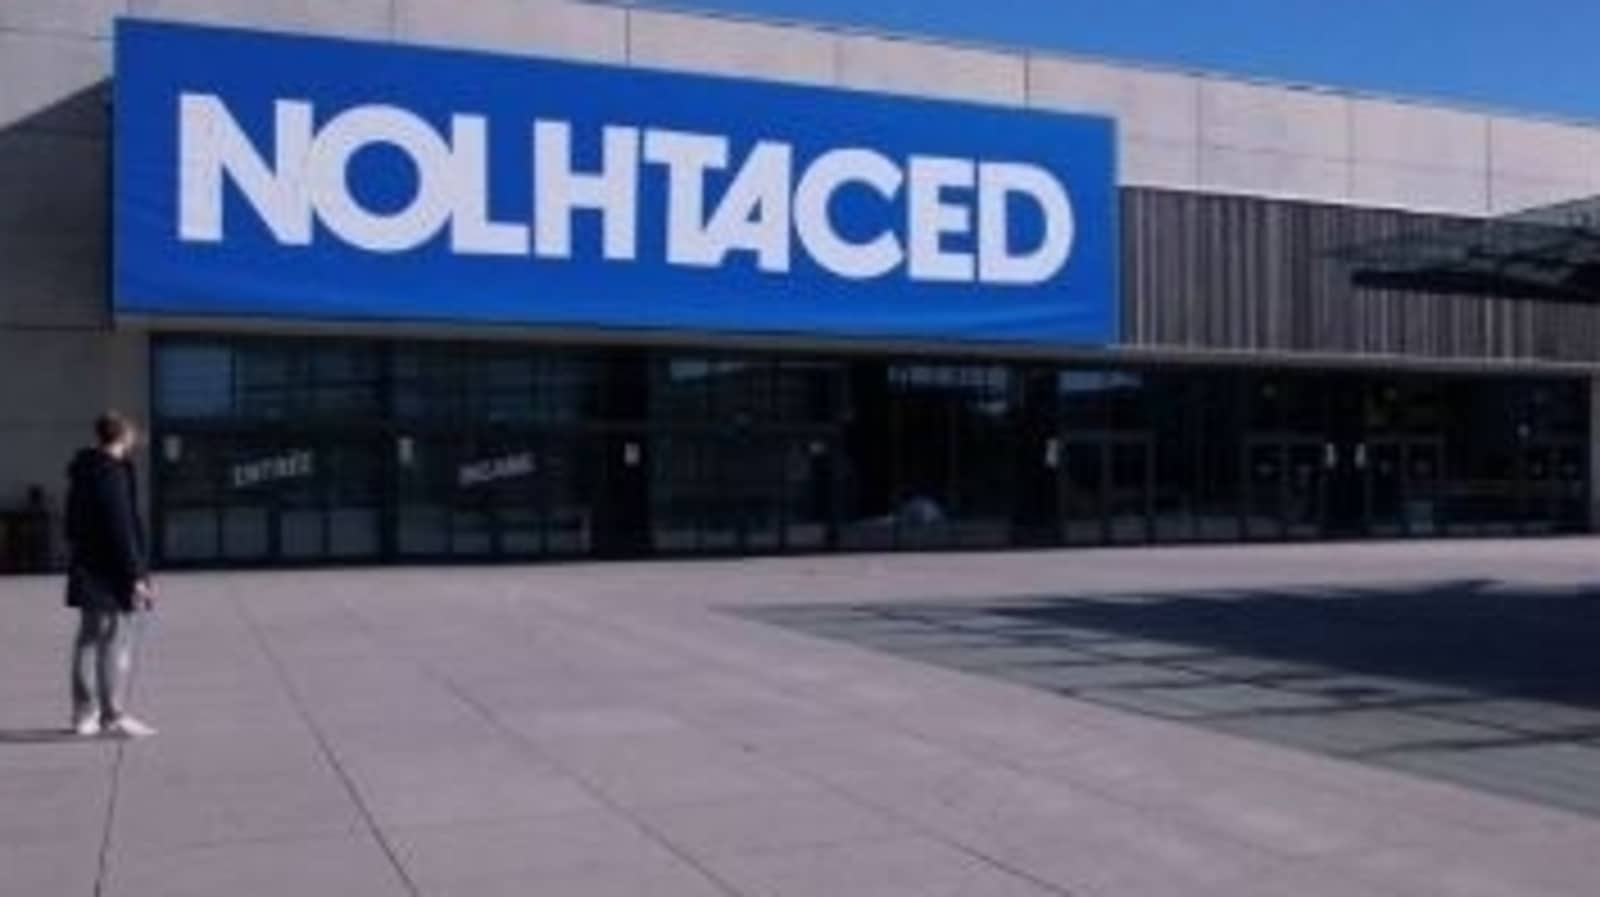 decathlon-reverses-its-name-to-nolhtaced-in-3-belgian-cities-here-s-why